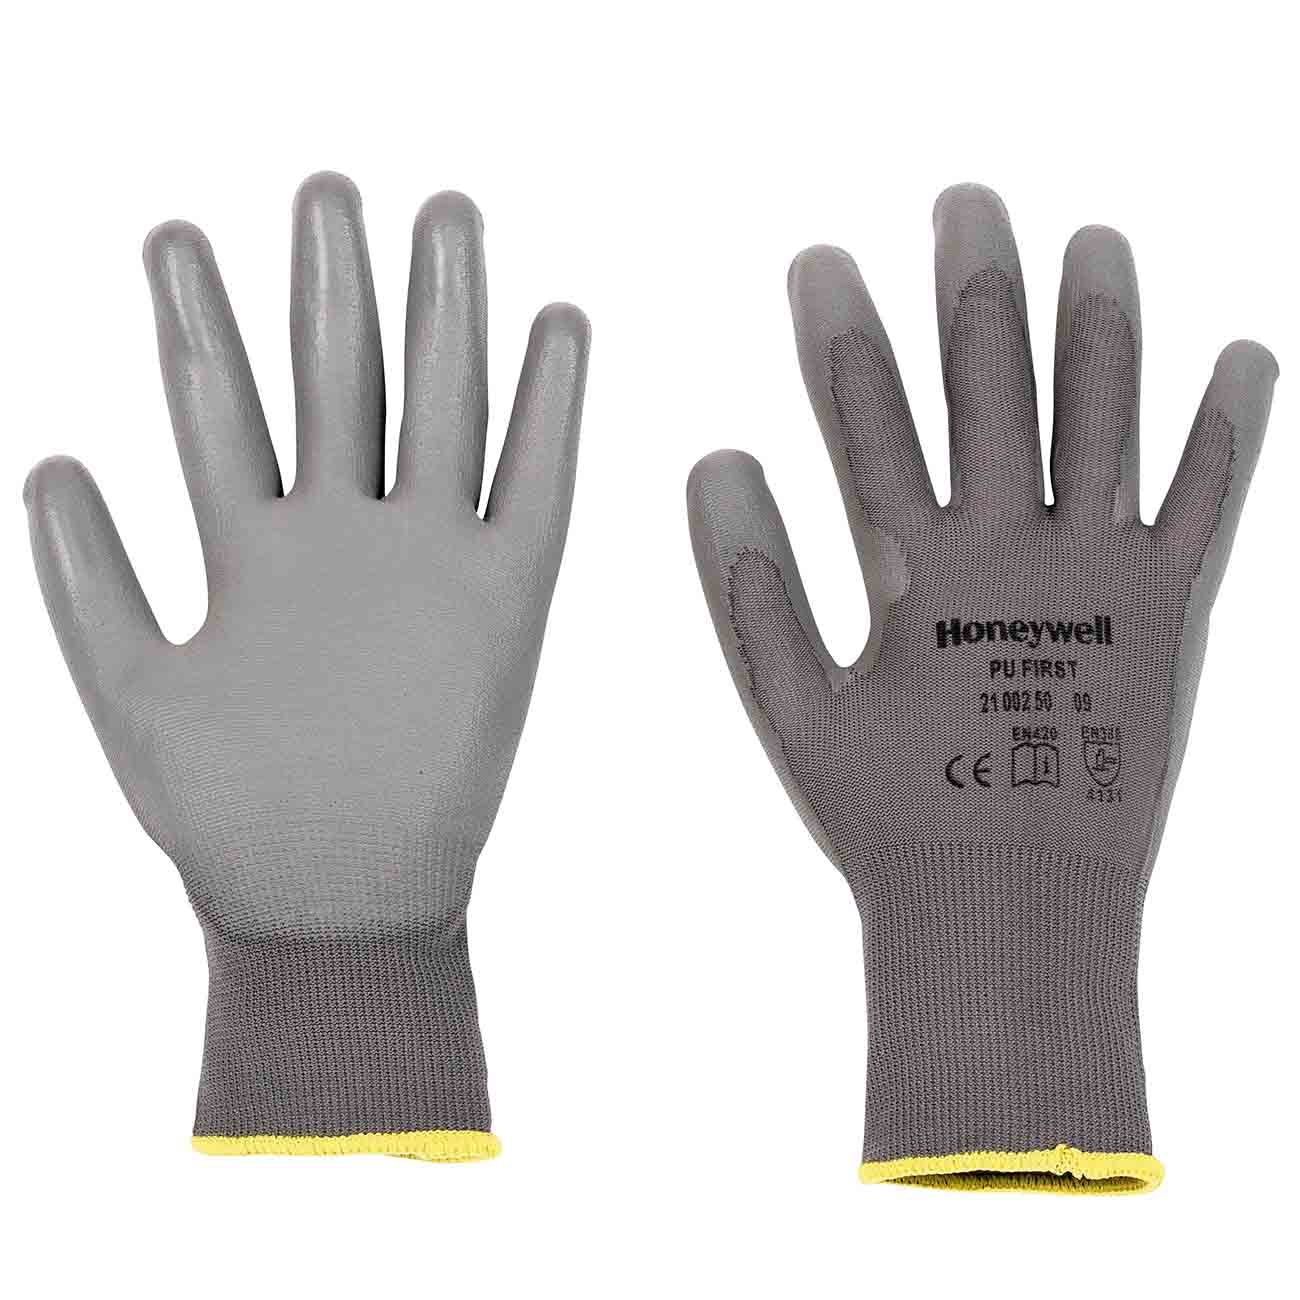 Honeywell 2100250 PU First Palm-Side Coated Grey Gloves